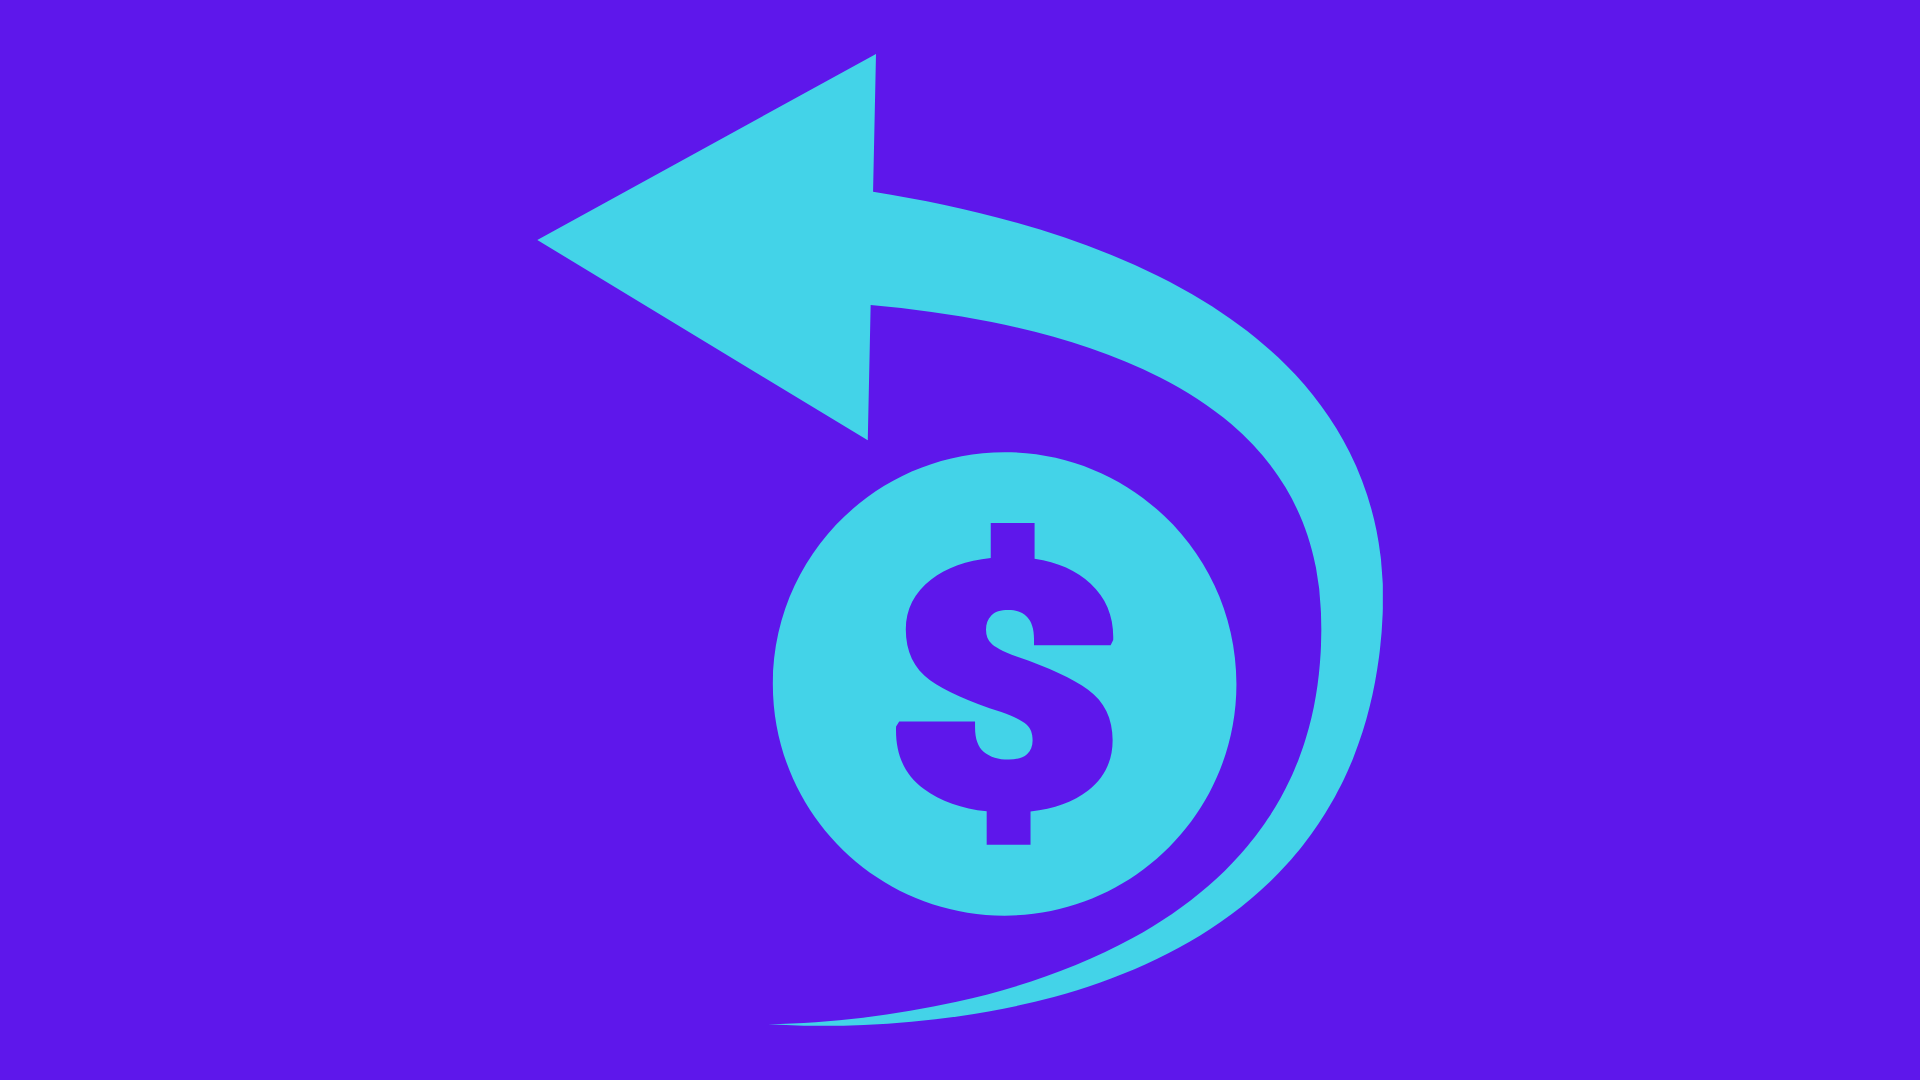 illustration of a dollar sign and an arrow illustrating return on investment